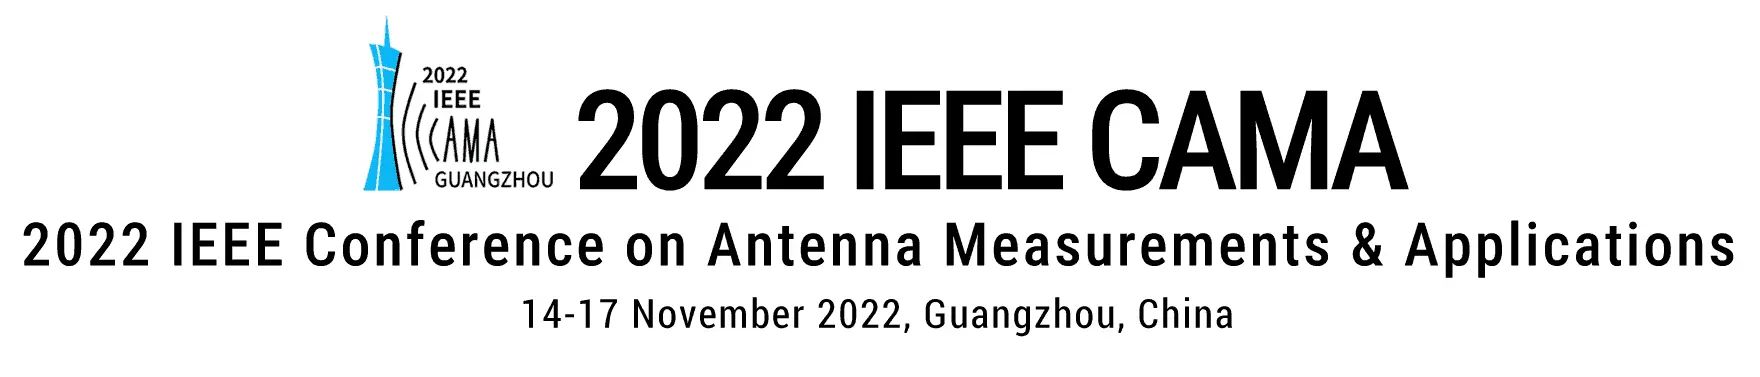 2022 IEEE Conference on Antenna Measurements & Applications